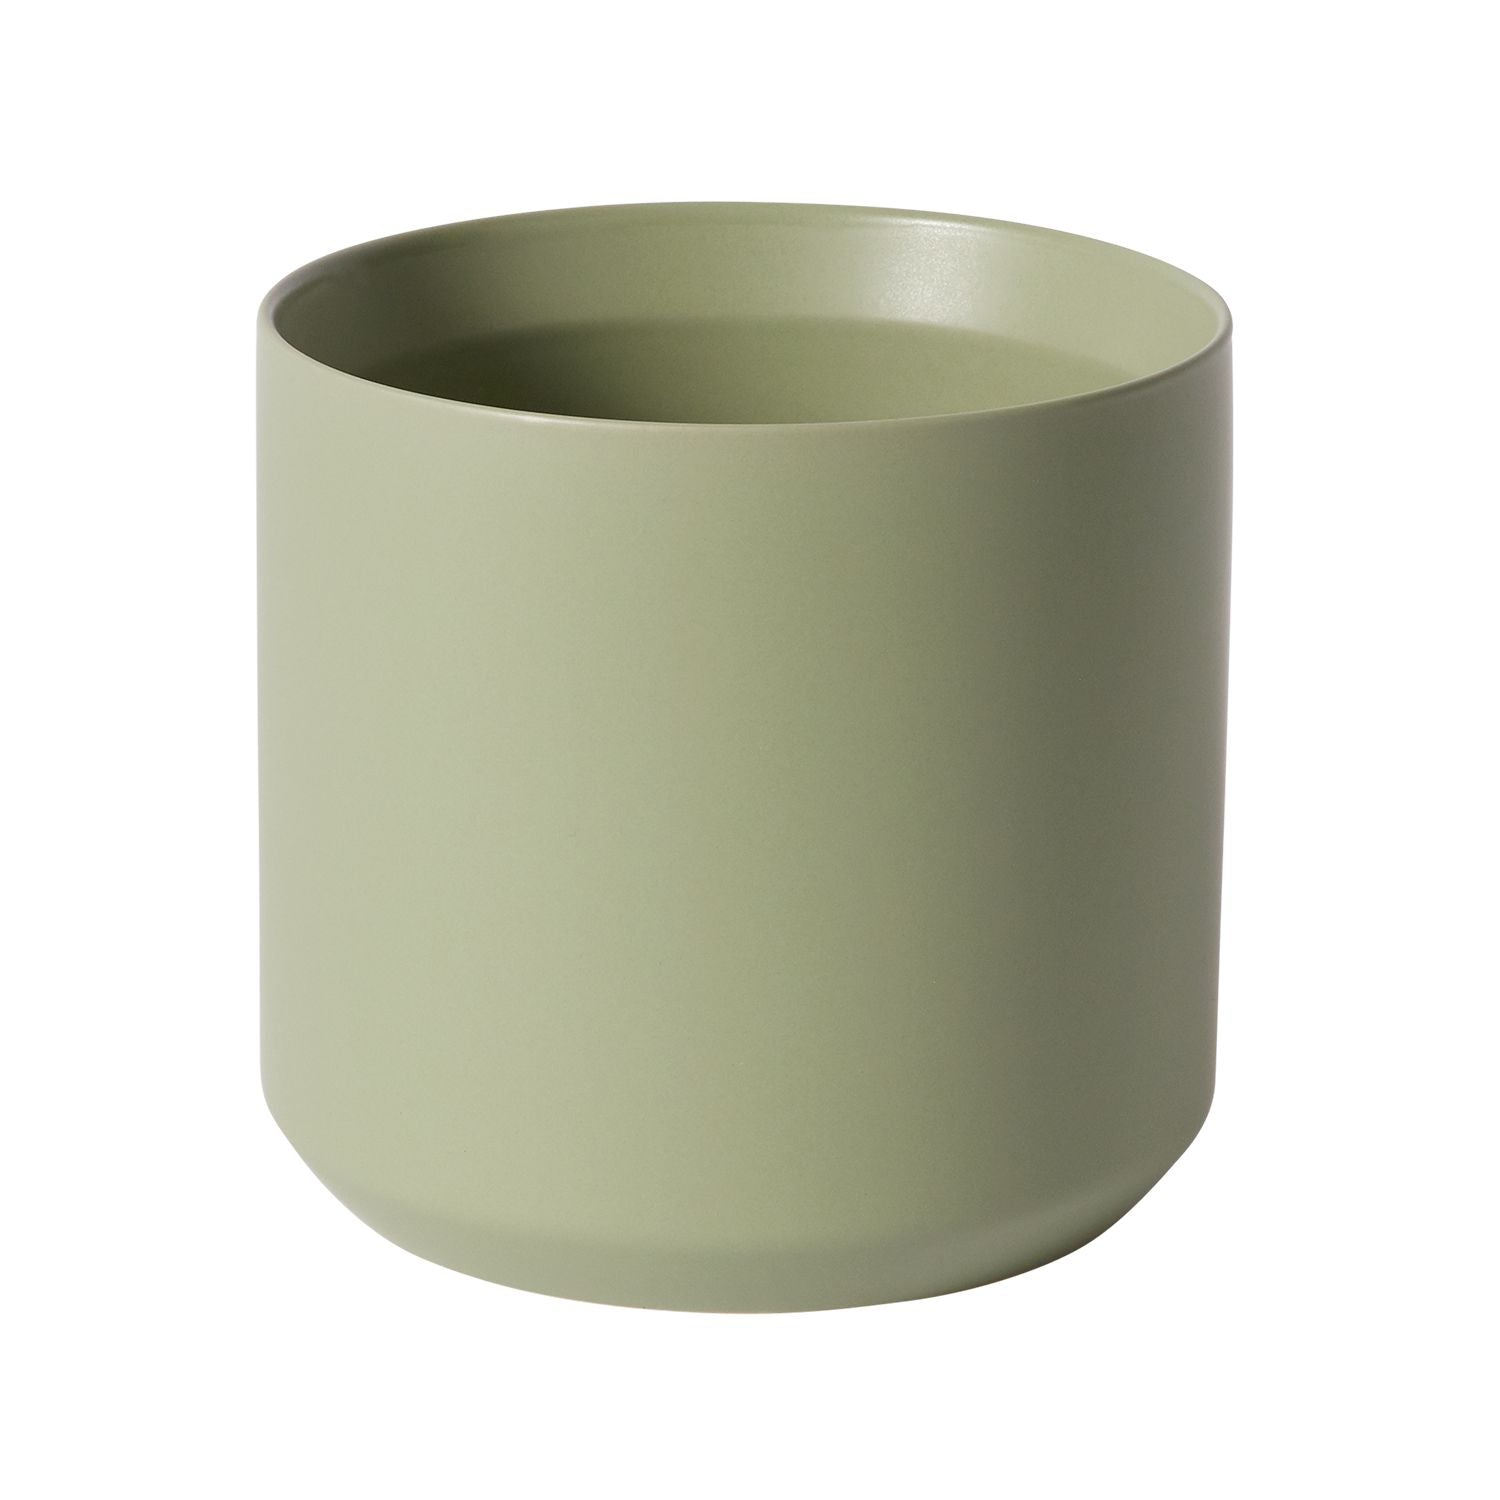 Kendall Pot in Green